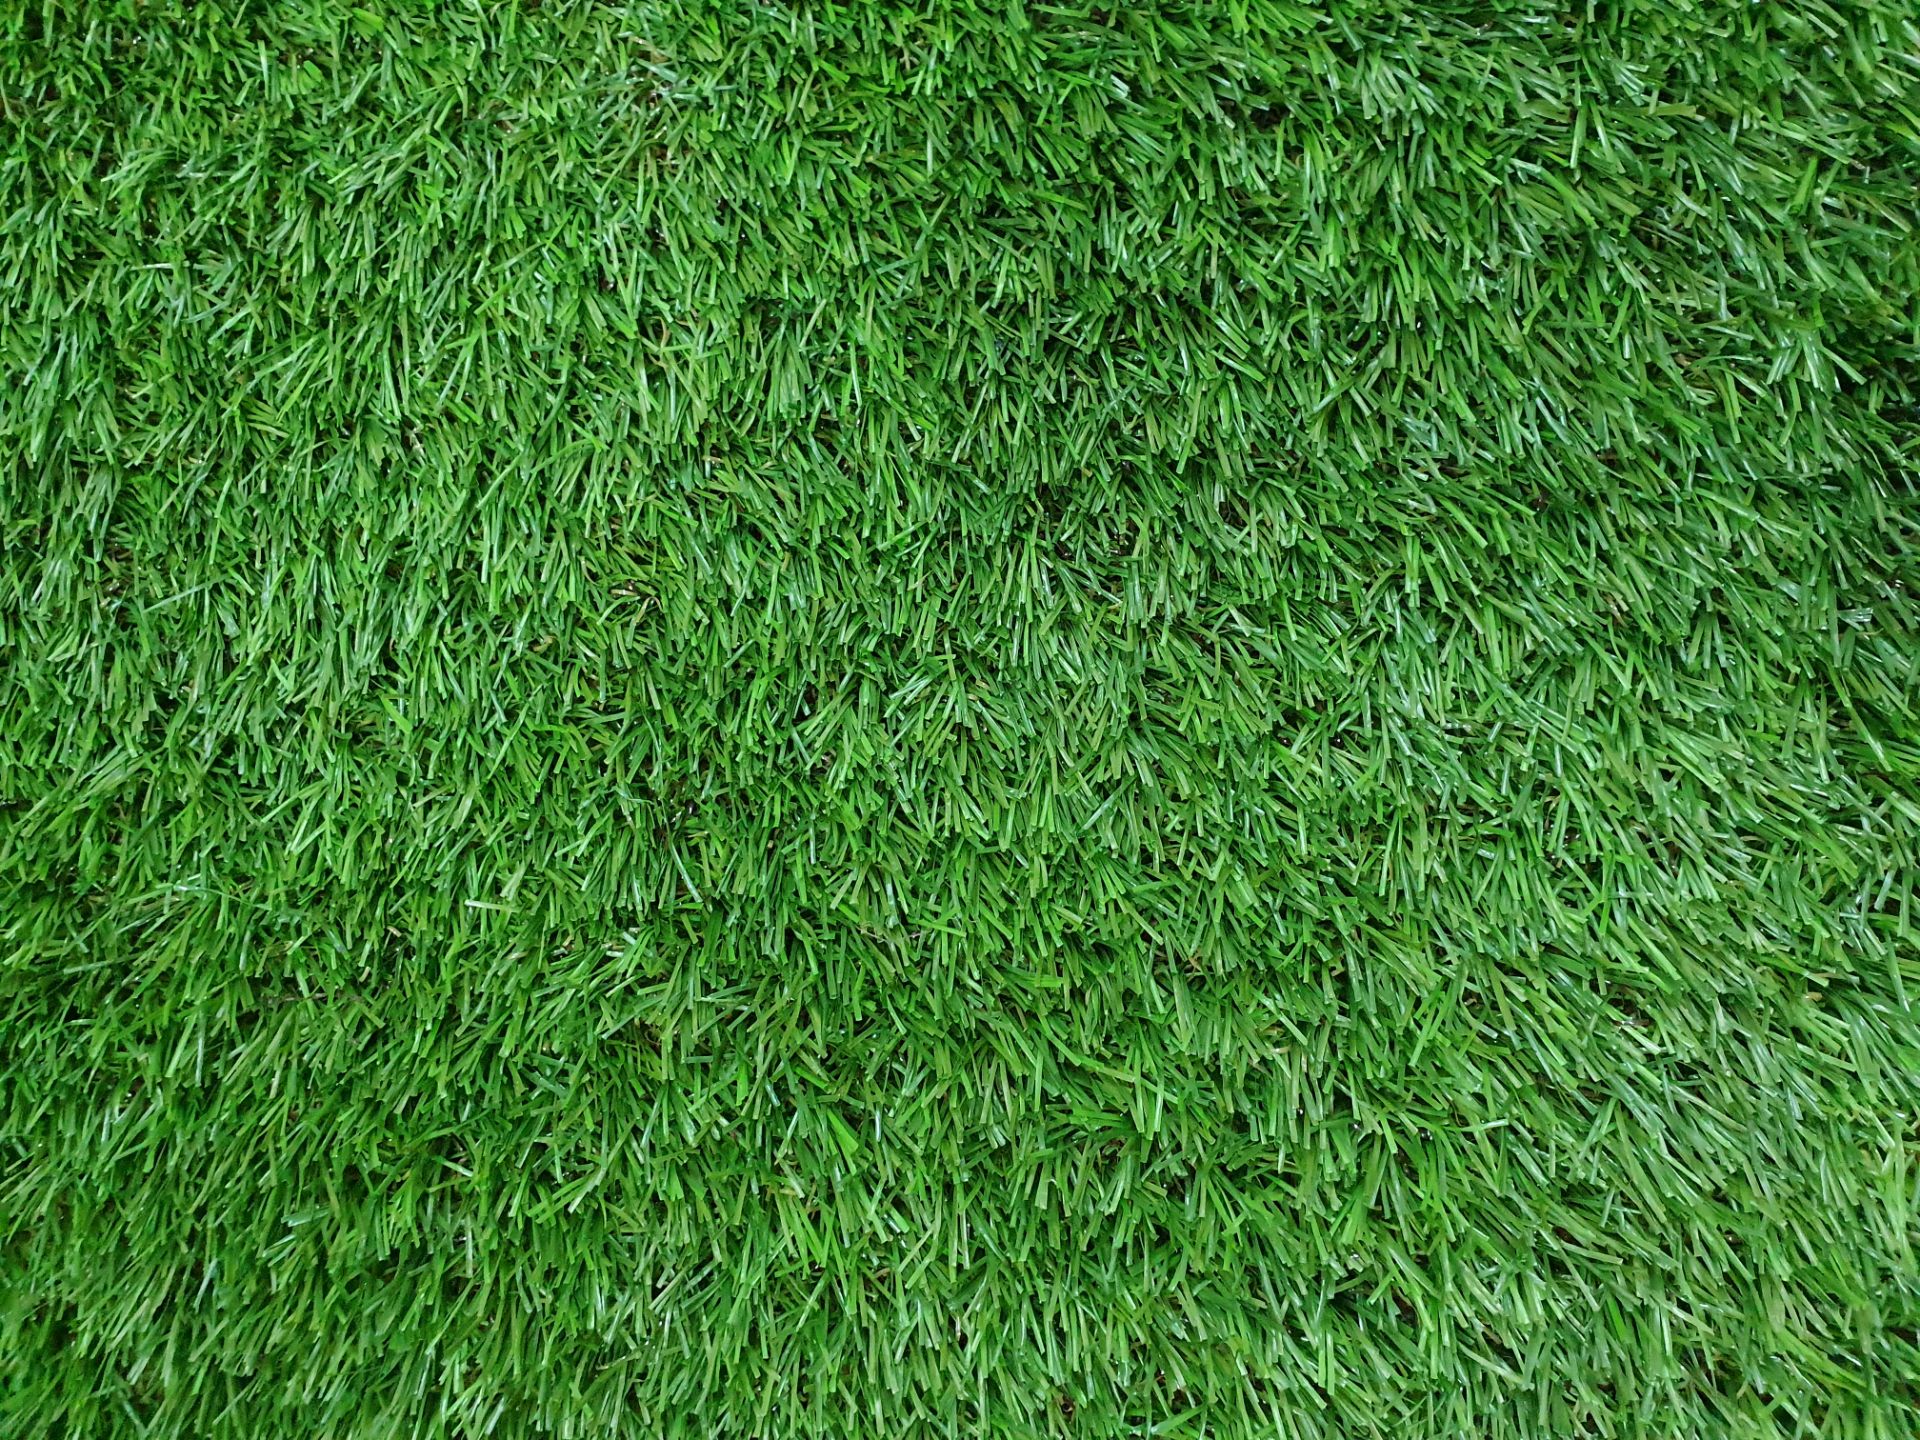 Roll of Green Artificial Grass | Approximate size: 4m x 4m - Image 3 of 3